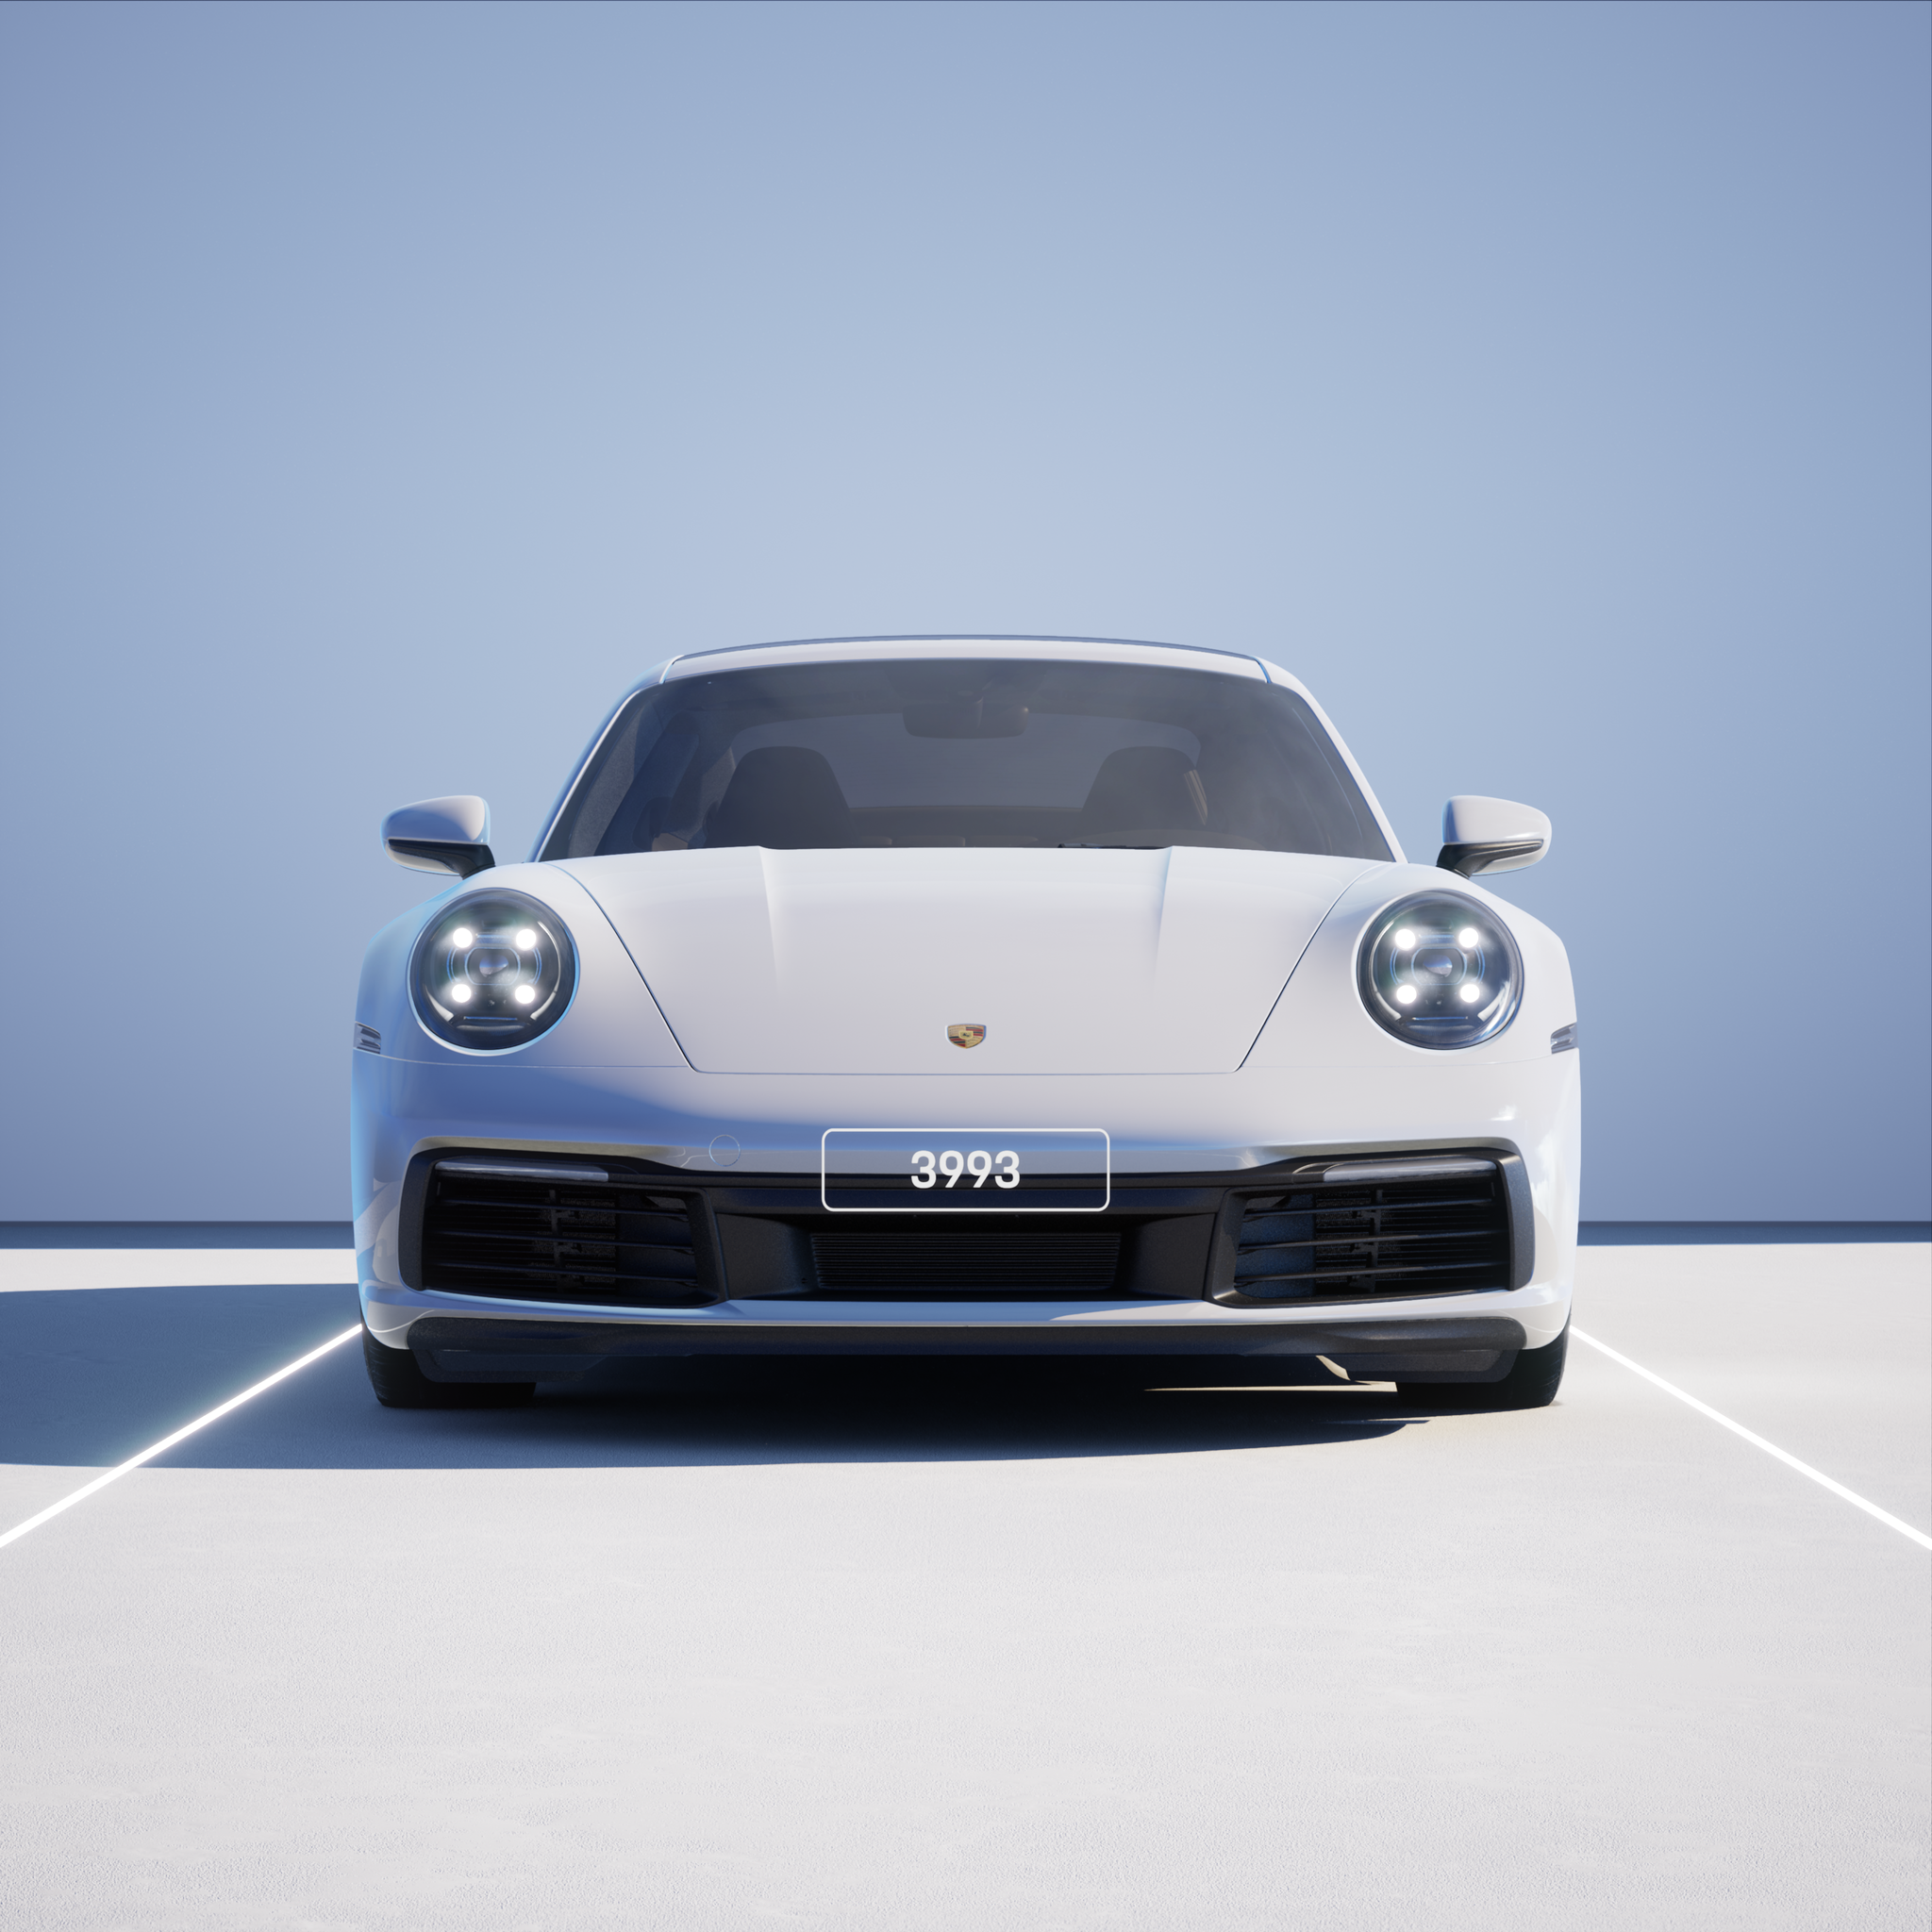 The PORSCHΞ 911 3993 image in phase